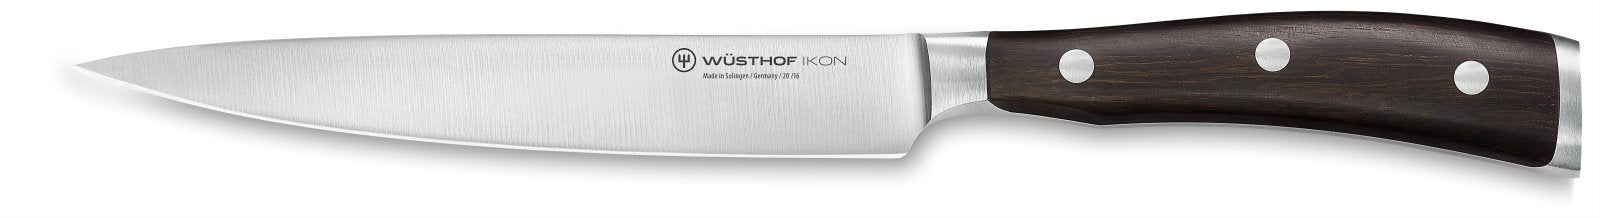 Wusthof IKON 6 Piece Block Set - Brown Ash - WT1090570602 - The Cotswold Knife Company